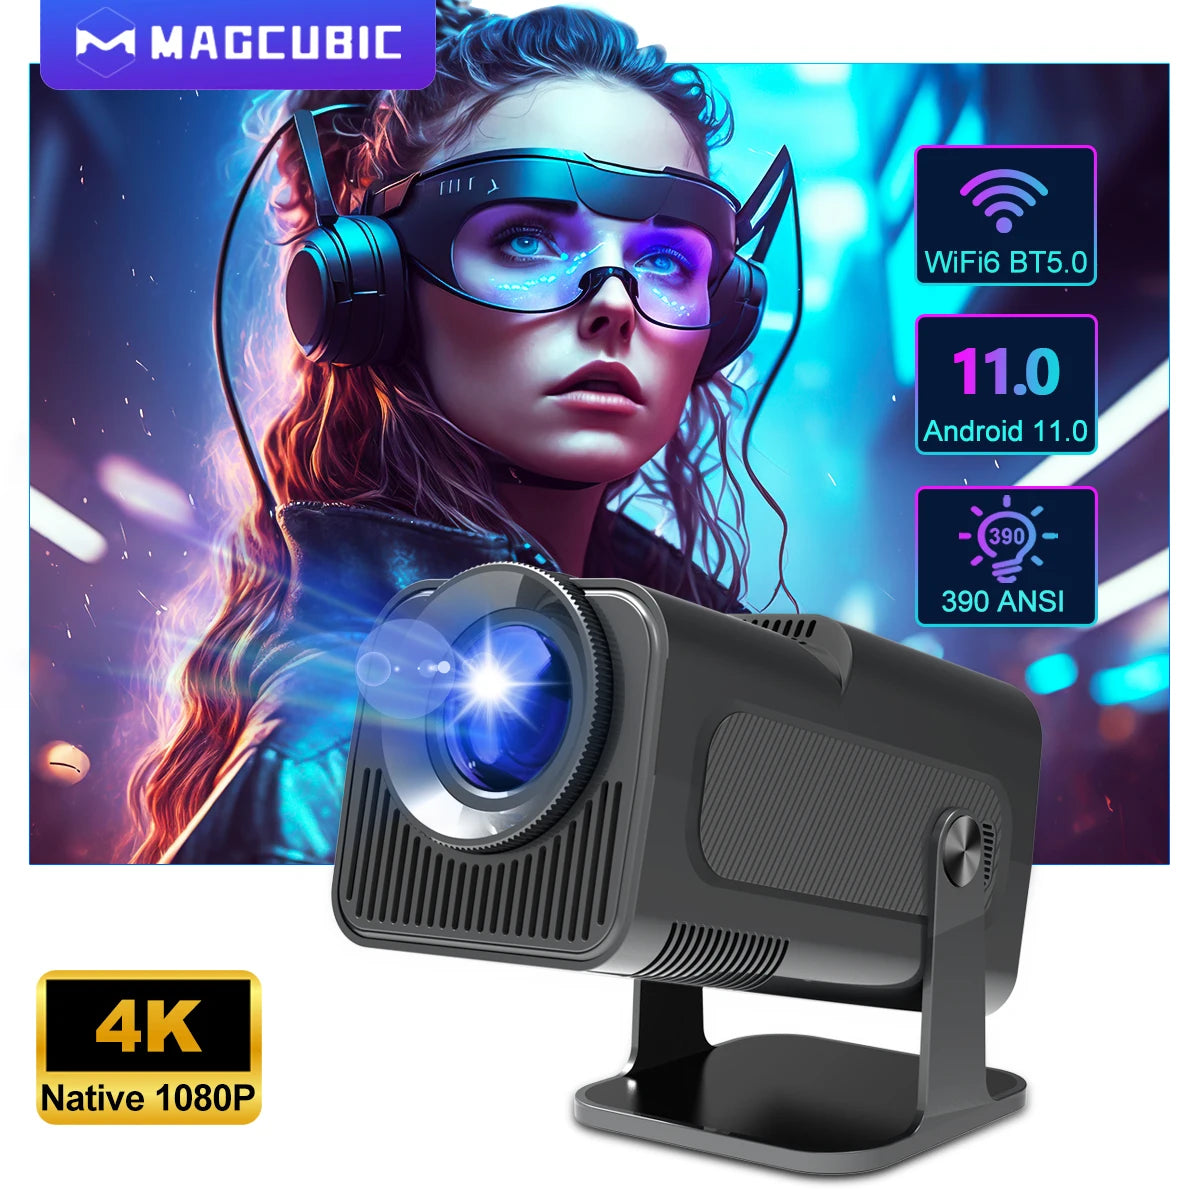 HY320 Mini Projector  4K Native 1080P Android 11 Projector 390ANSI  Dual Wifi6 BT5.0 Cinema Outdoor Portable Projector - MAGCUBIC